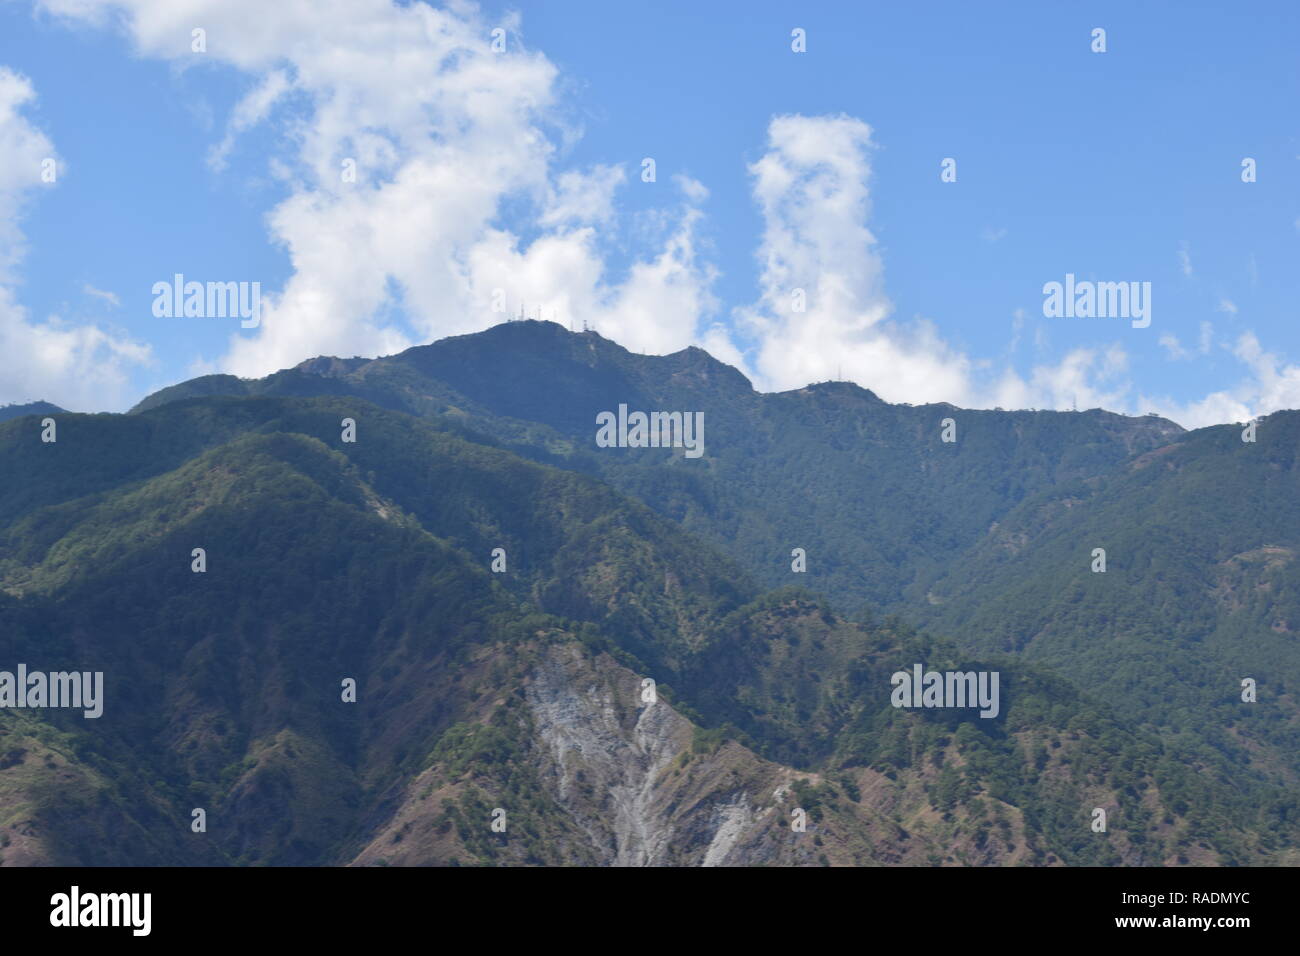 Communication and broadcasting equipment mounted on the summit of Mount Sto. Tomas in Tuba, Benguet, Philippines viewed from different locations. Stock Photo